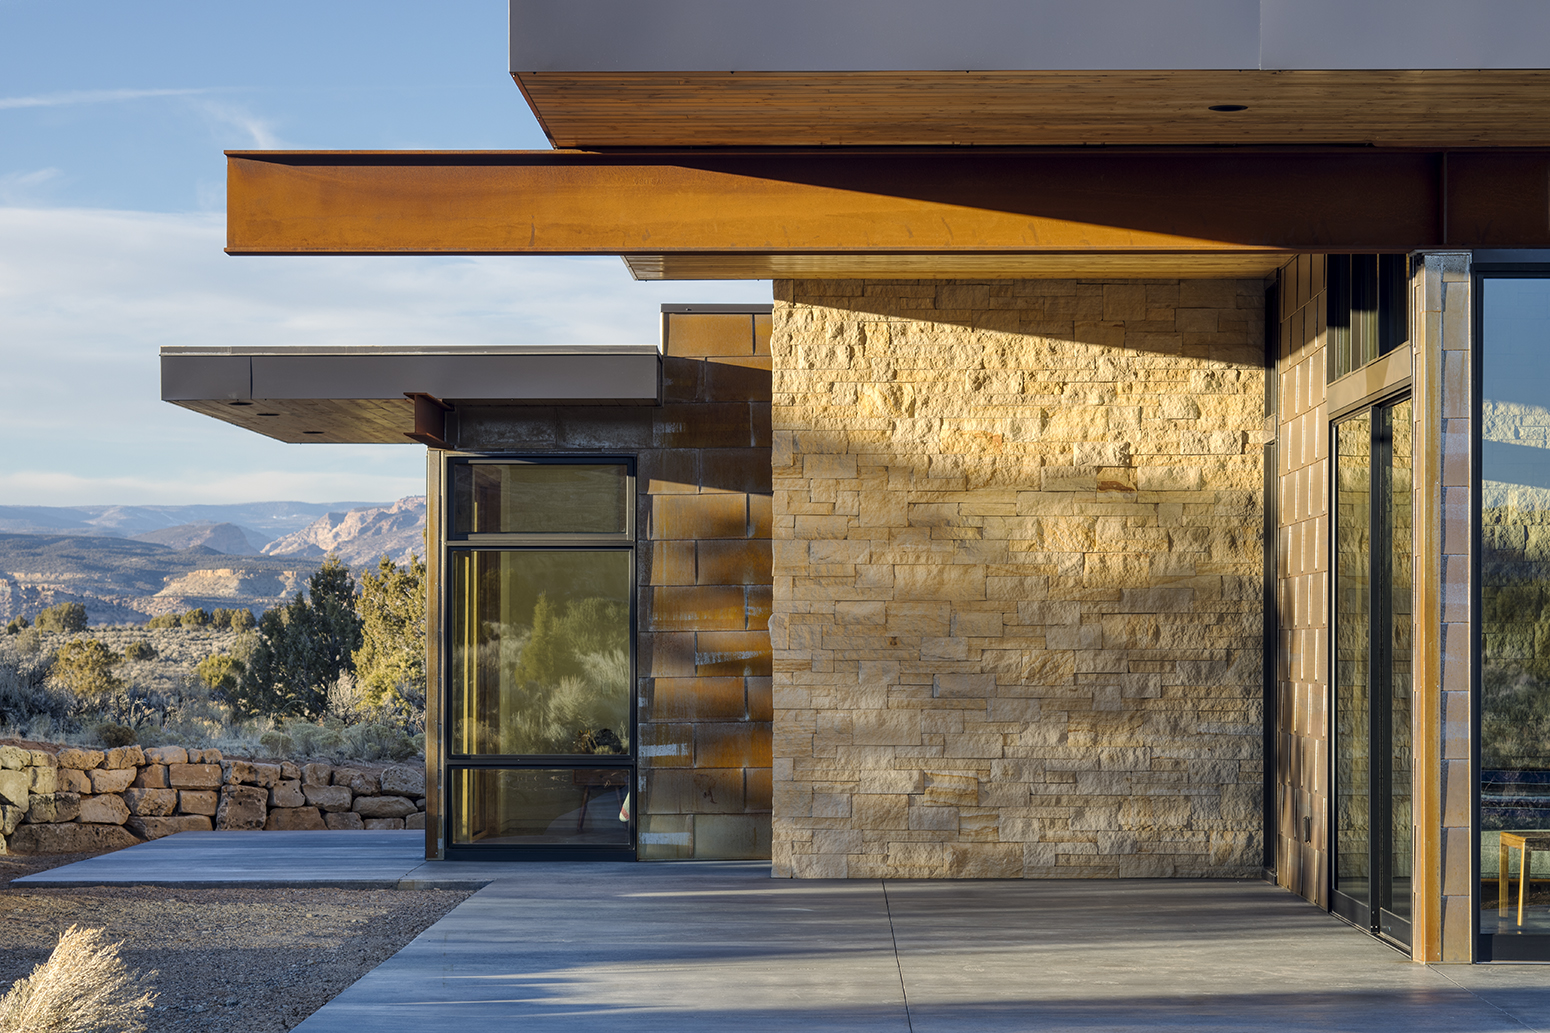 Private Residence in Escalante UT for Coates Design.Architectural Photography by: Paul Richer / RICHER IMAGES.